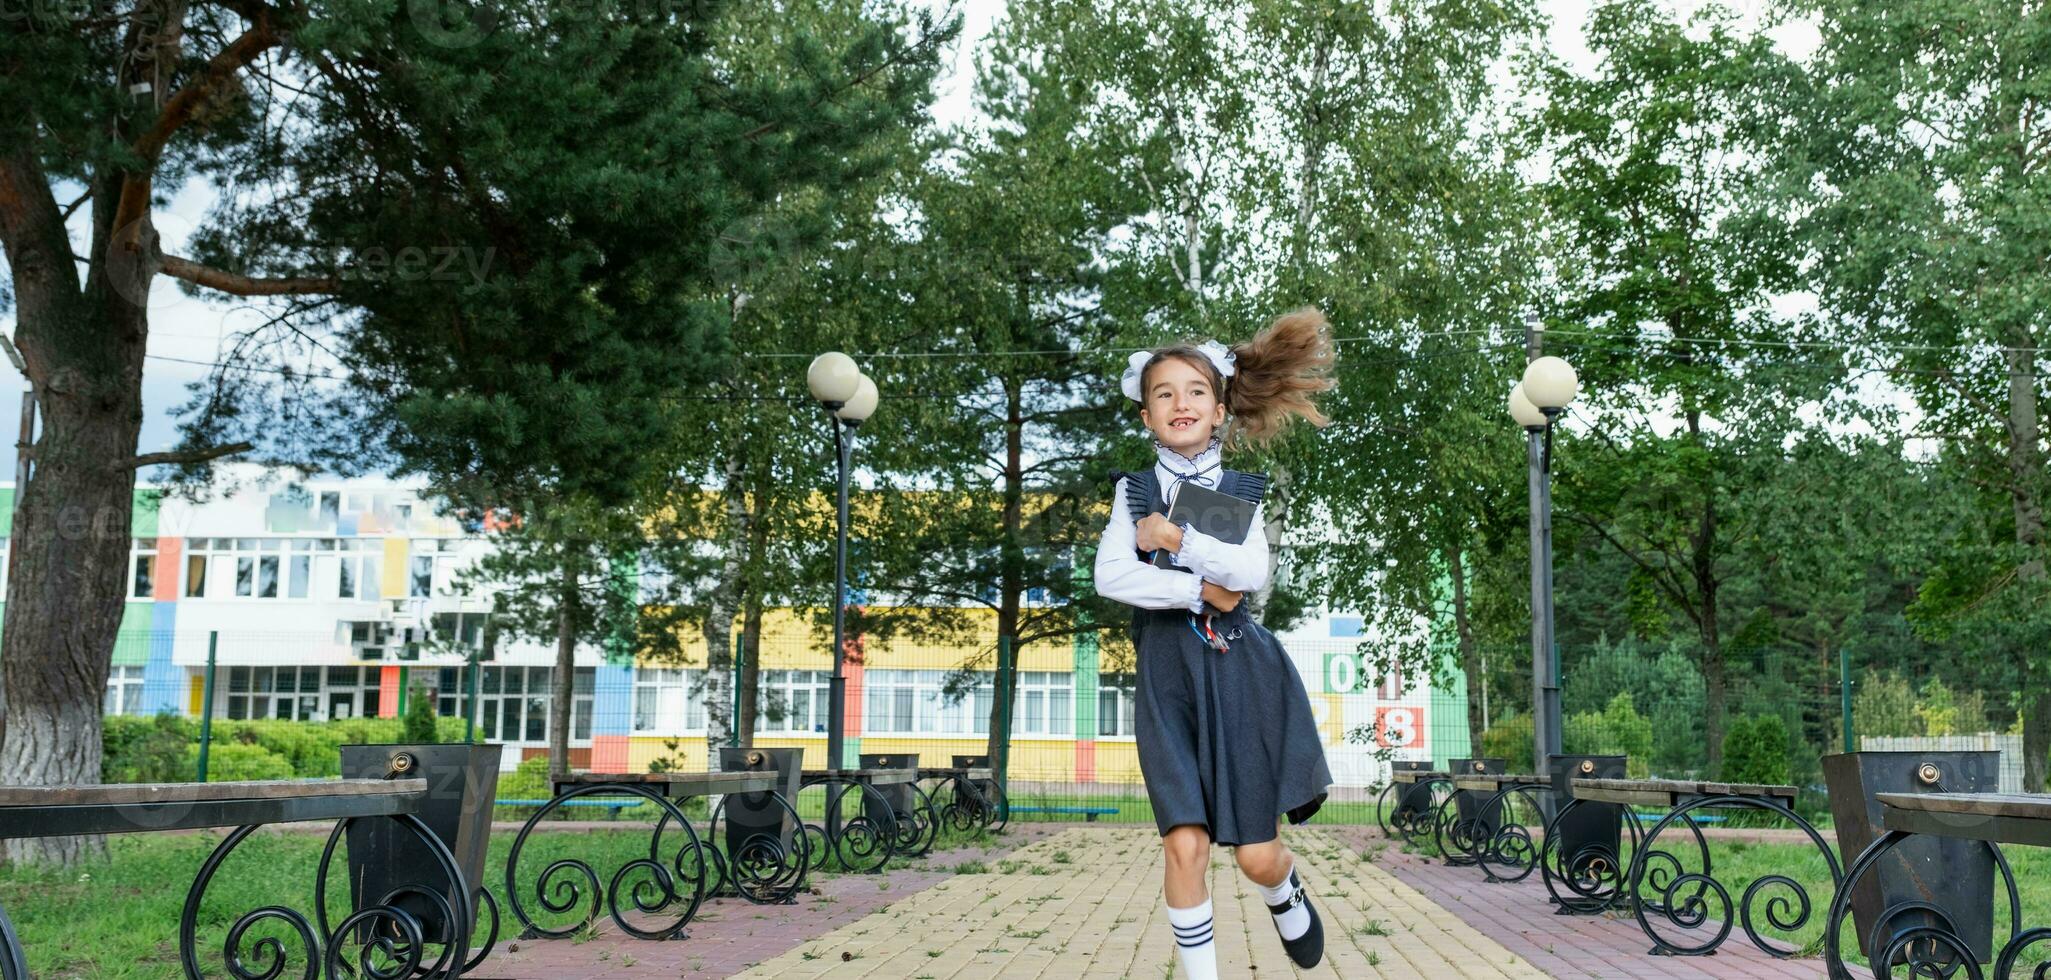 Cheerful funny girl with toothless smile in school uniform with white bows running in school yard. Back to school, September 1. Happy pupil with backpack. Primary education, elementary class. motion photo